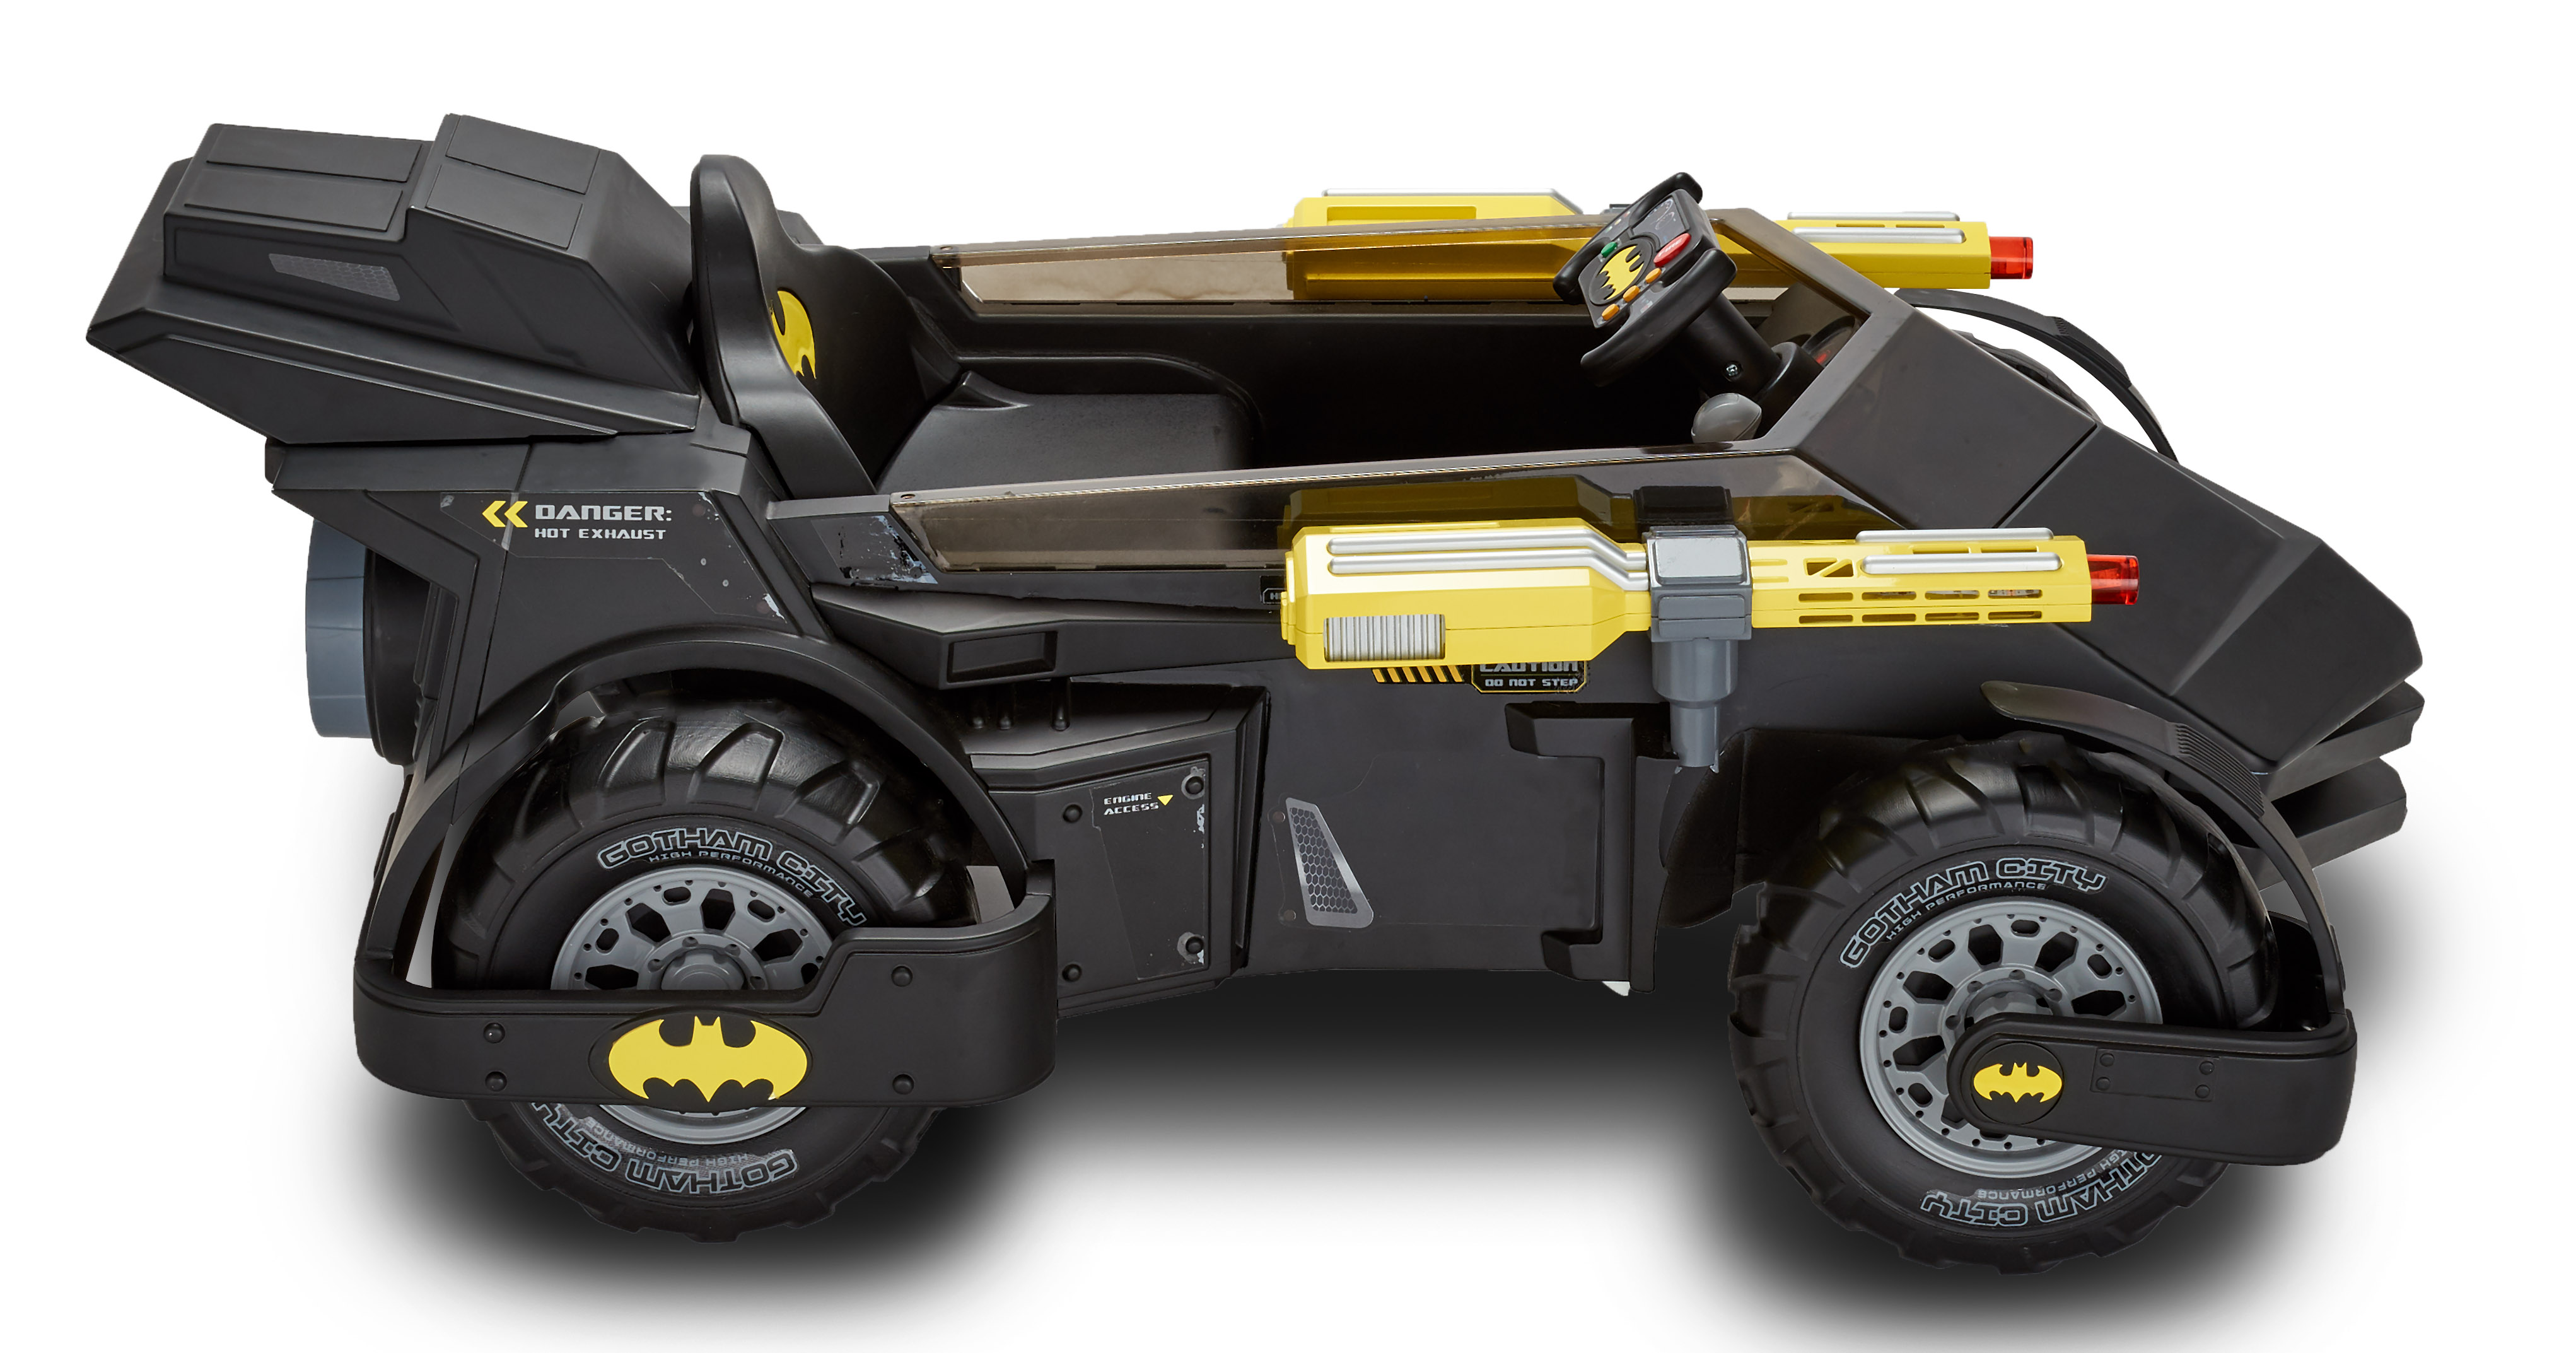 6 Volt DC Comics Batman Batmobile Battery Powered Ride-on - Features Light up Cannons and Sounds! - image 3 of 12